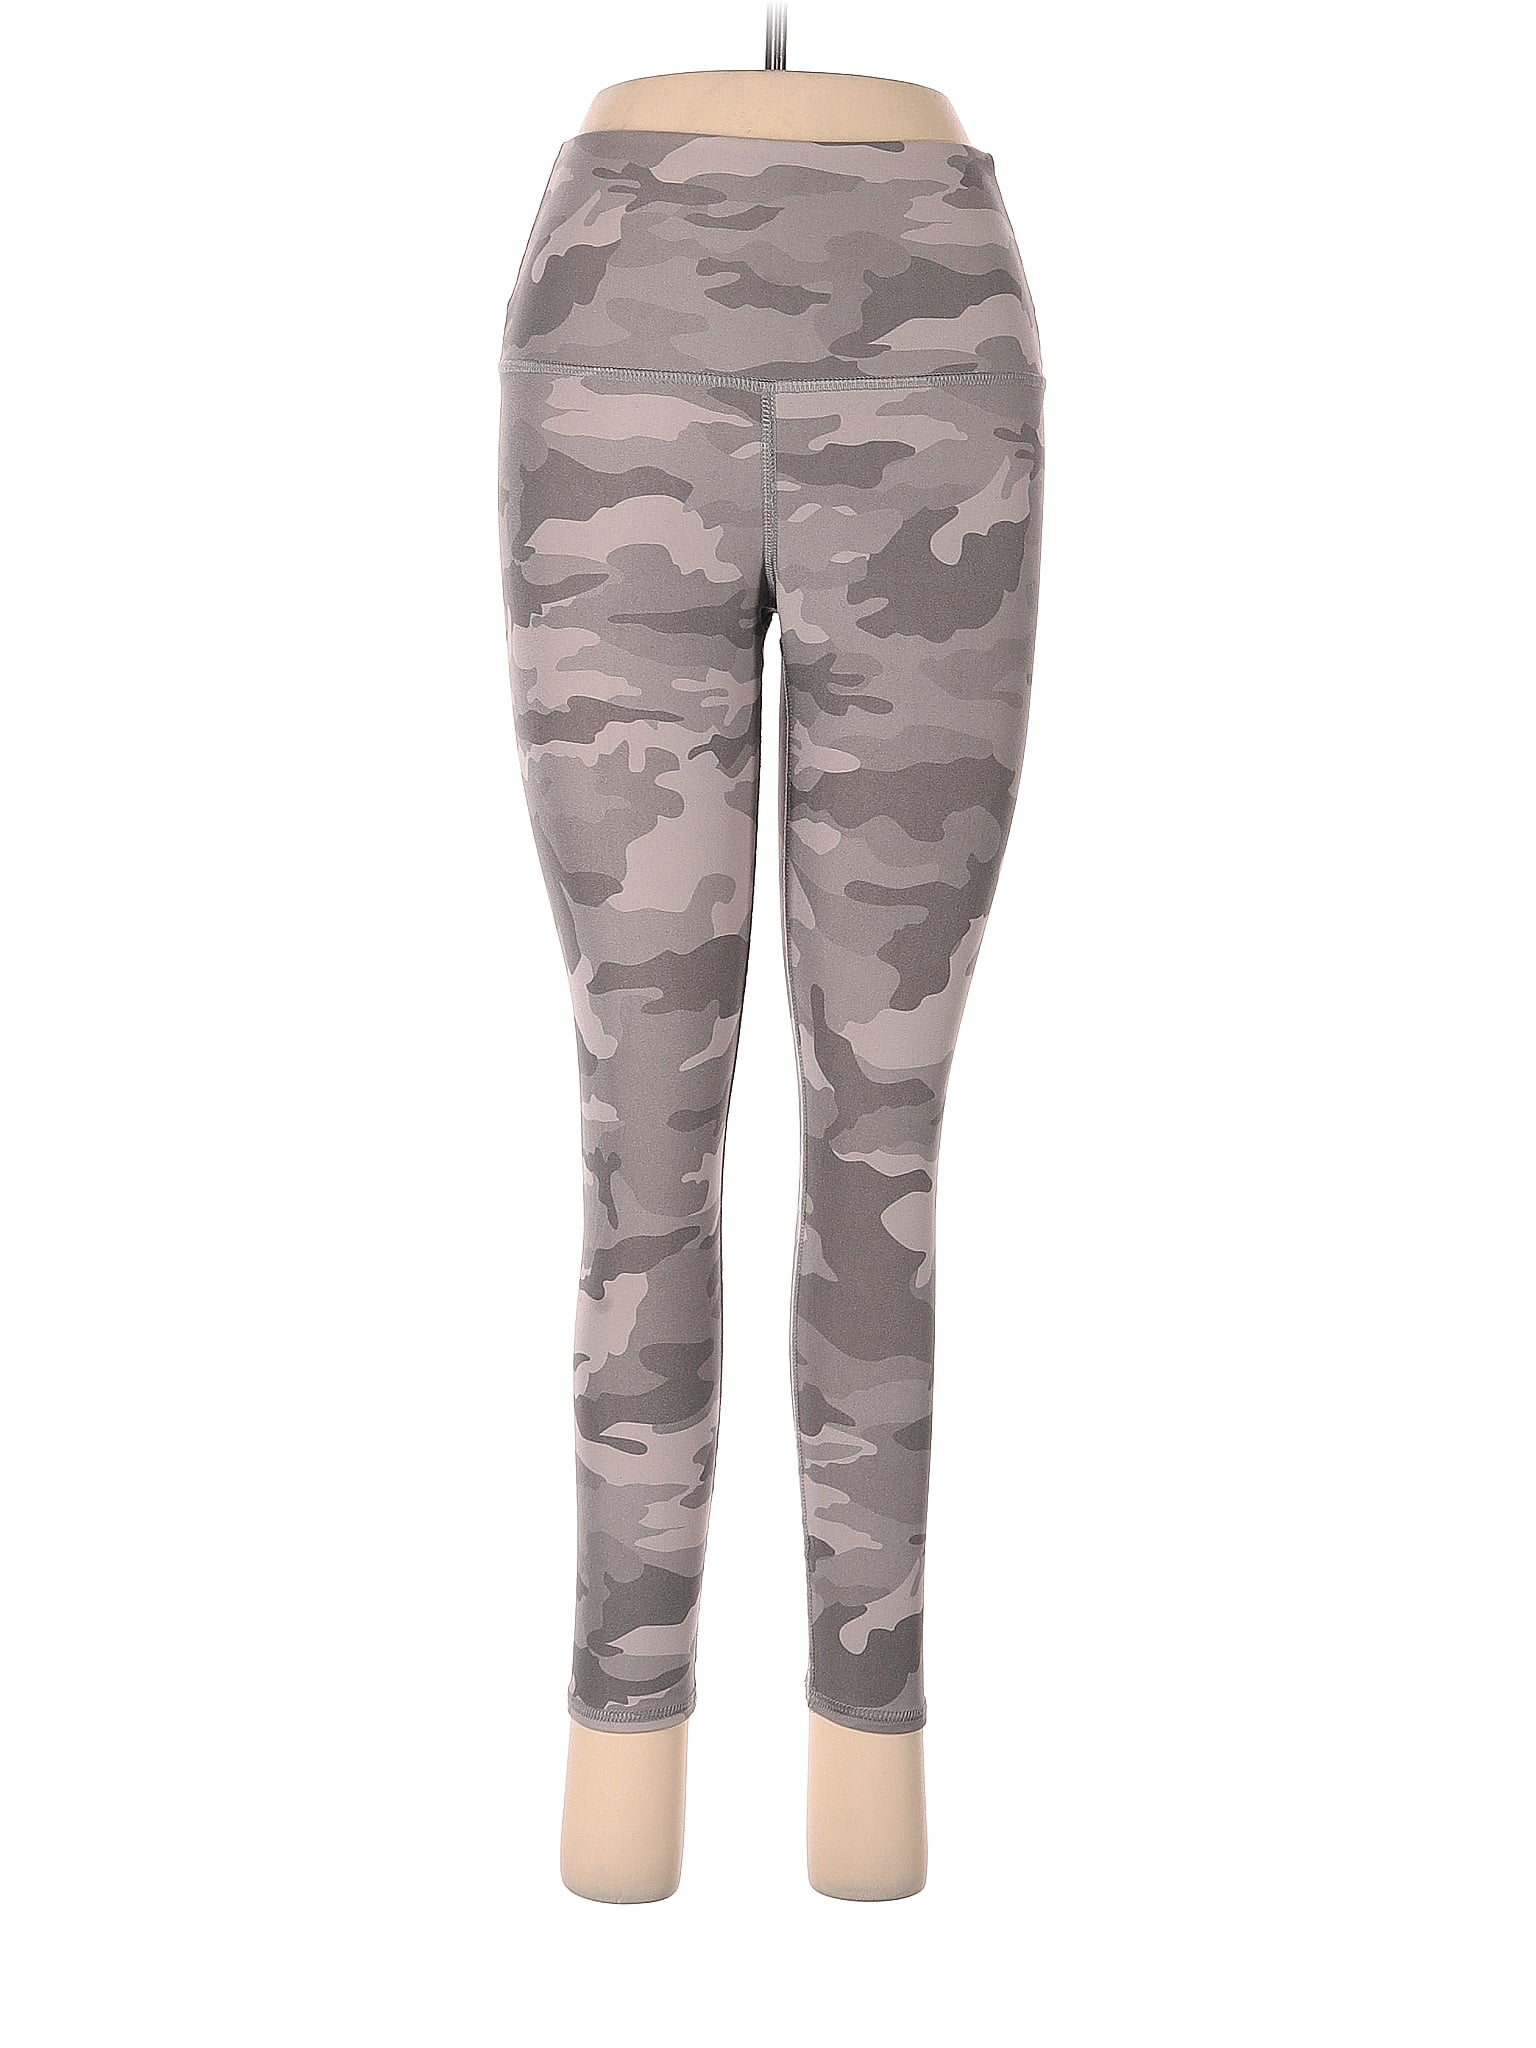 Evolution and Creation Camo Gray Leggings Size M - 15% off